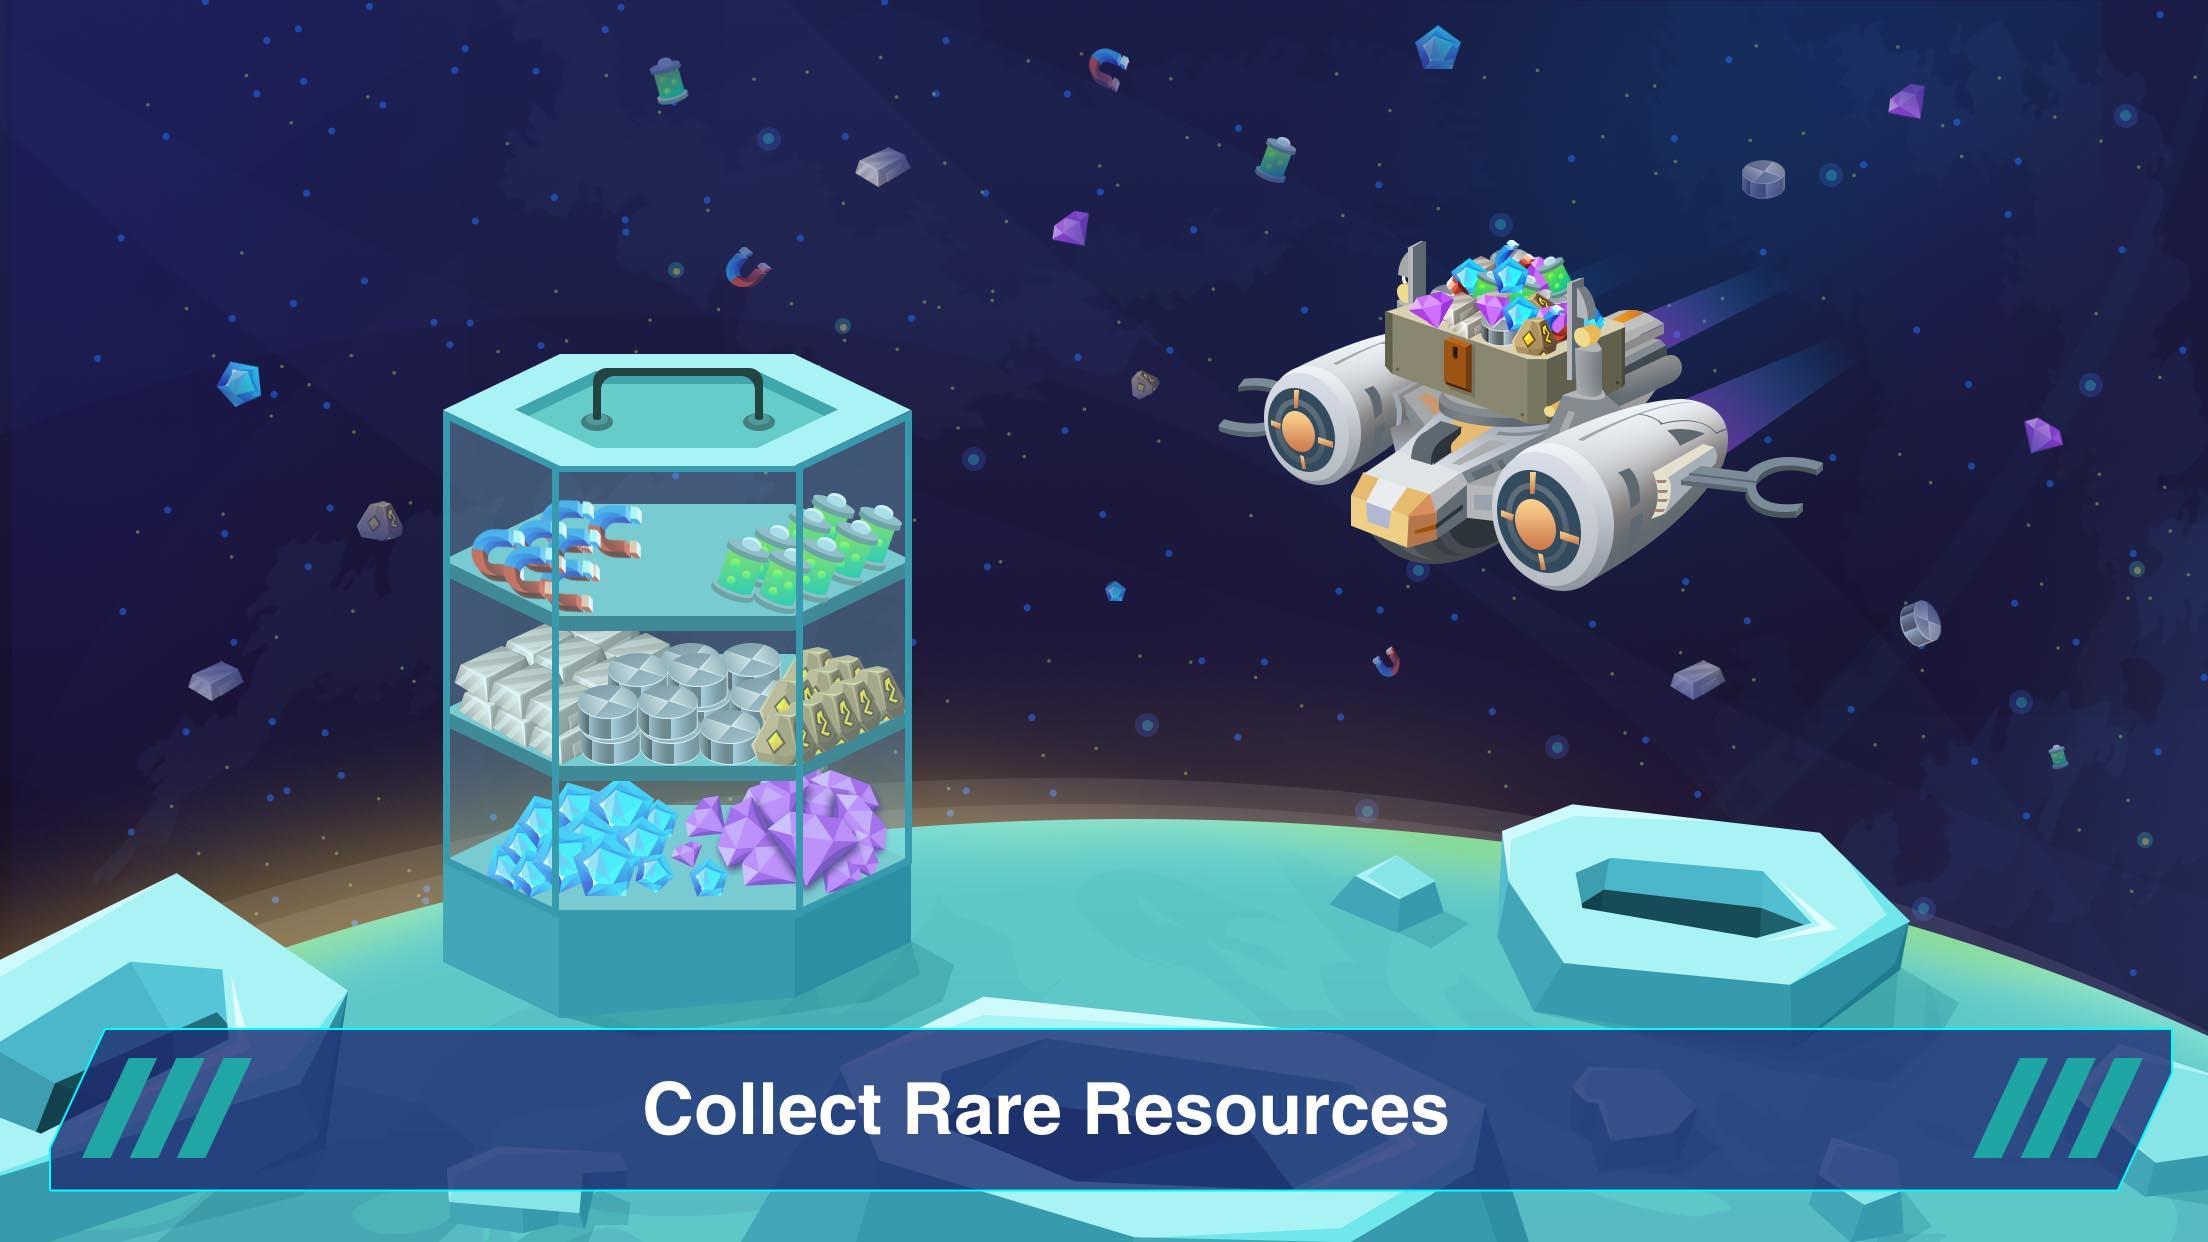 Screenshot 1 of Space Colonizers - Hộp cát 1.6.0